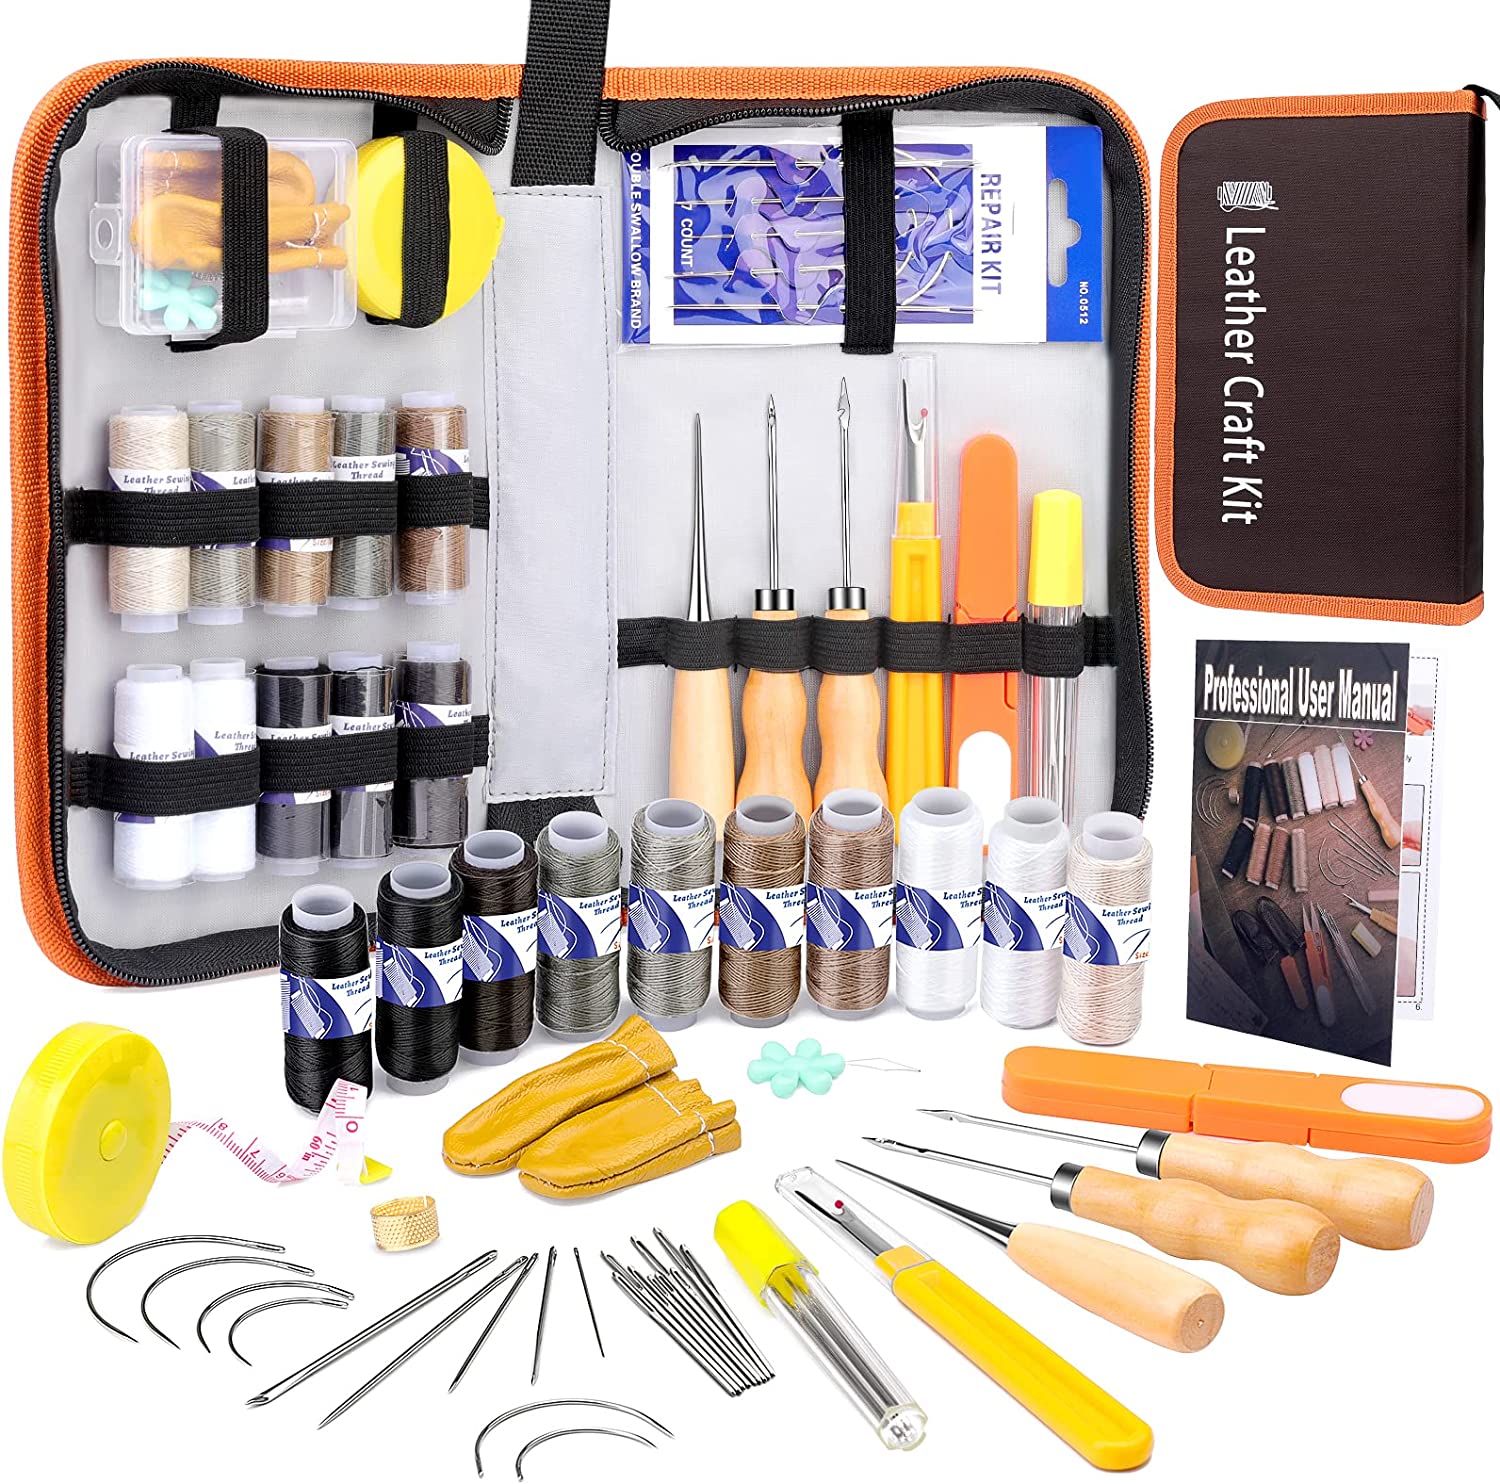 Upholstery Repair Sewing Kit Heavy Duty Sewing Kit With Sewing Awl Seam  Ripper Hand Sewing Stitching Needles Sewing